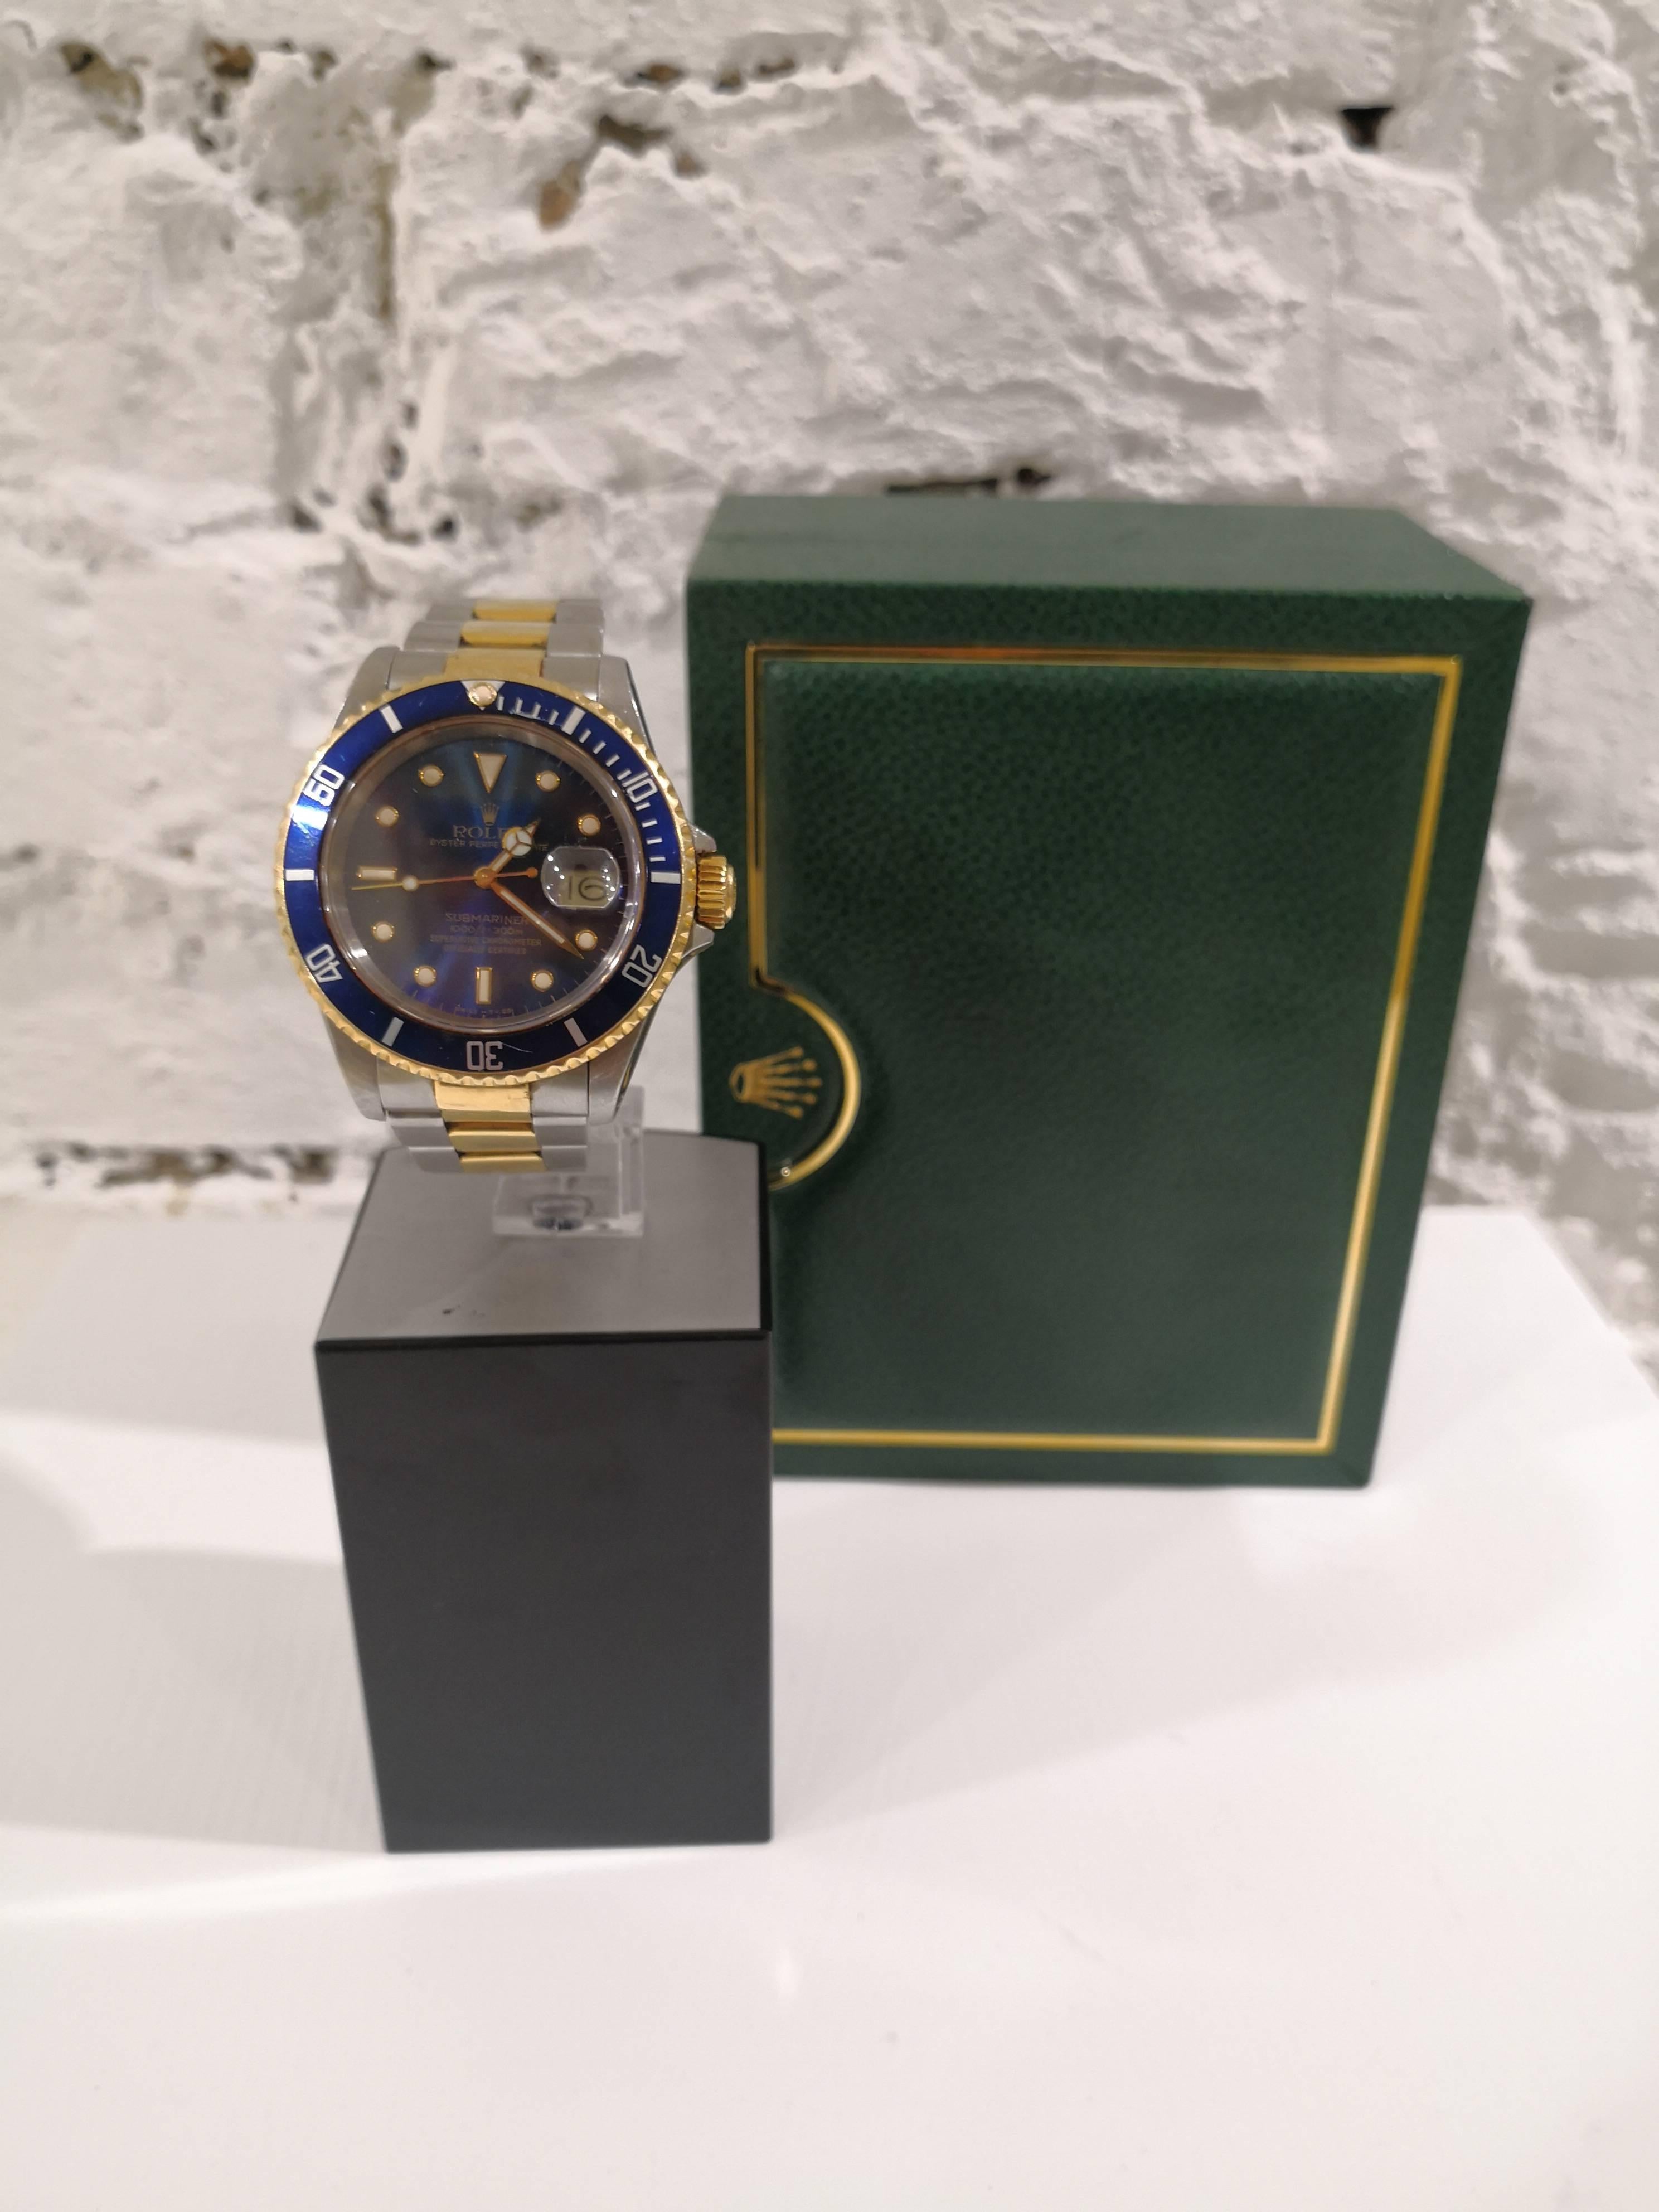 Rolex Gold Submariner Blue Stainless Steel and 18 Karat Yellow Gold Men’s

date: 24/12/1988
